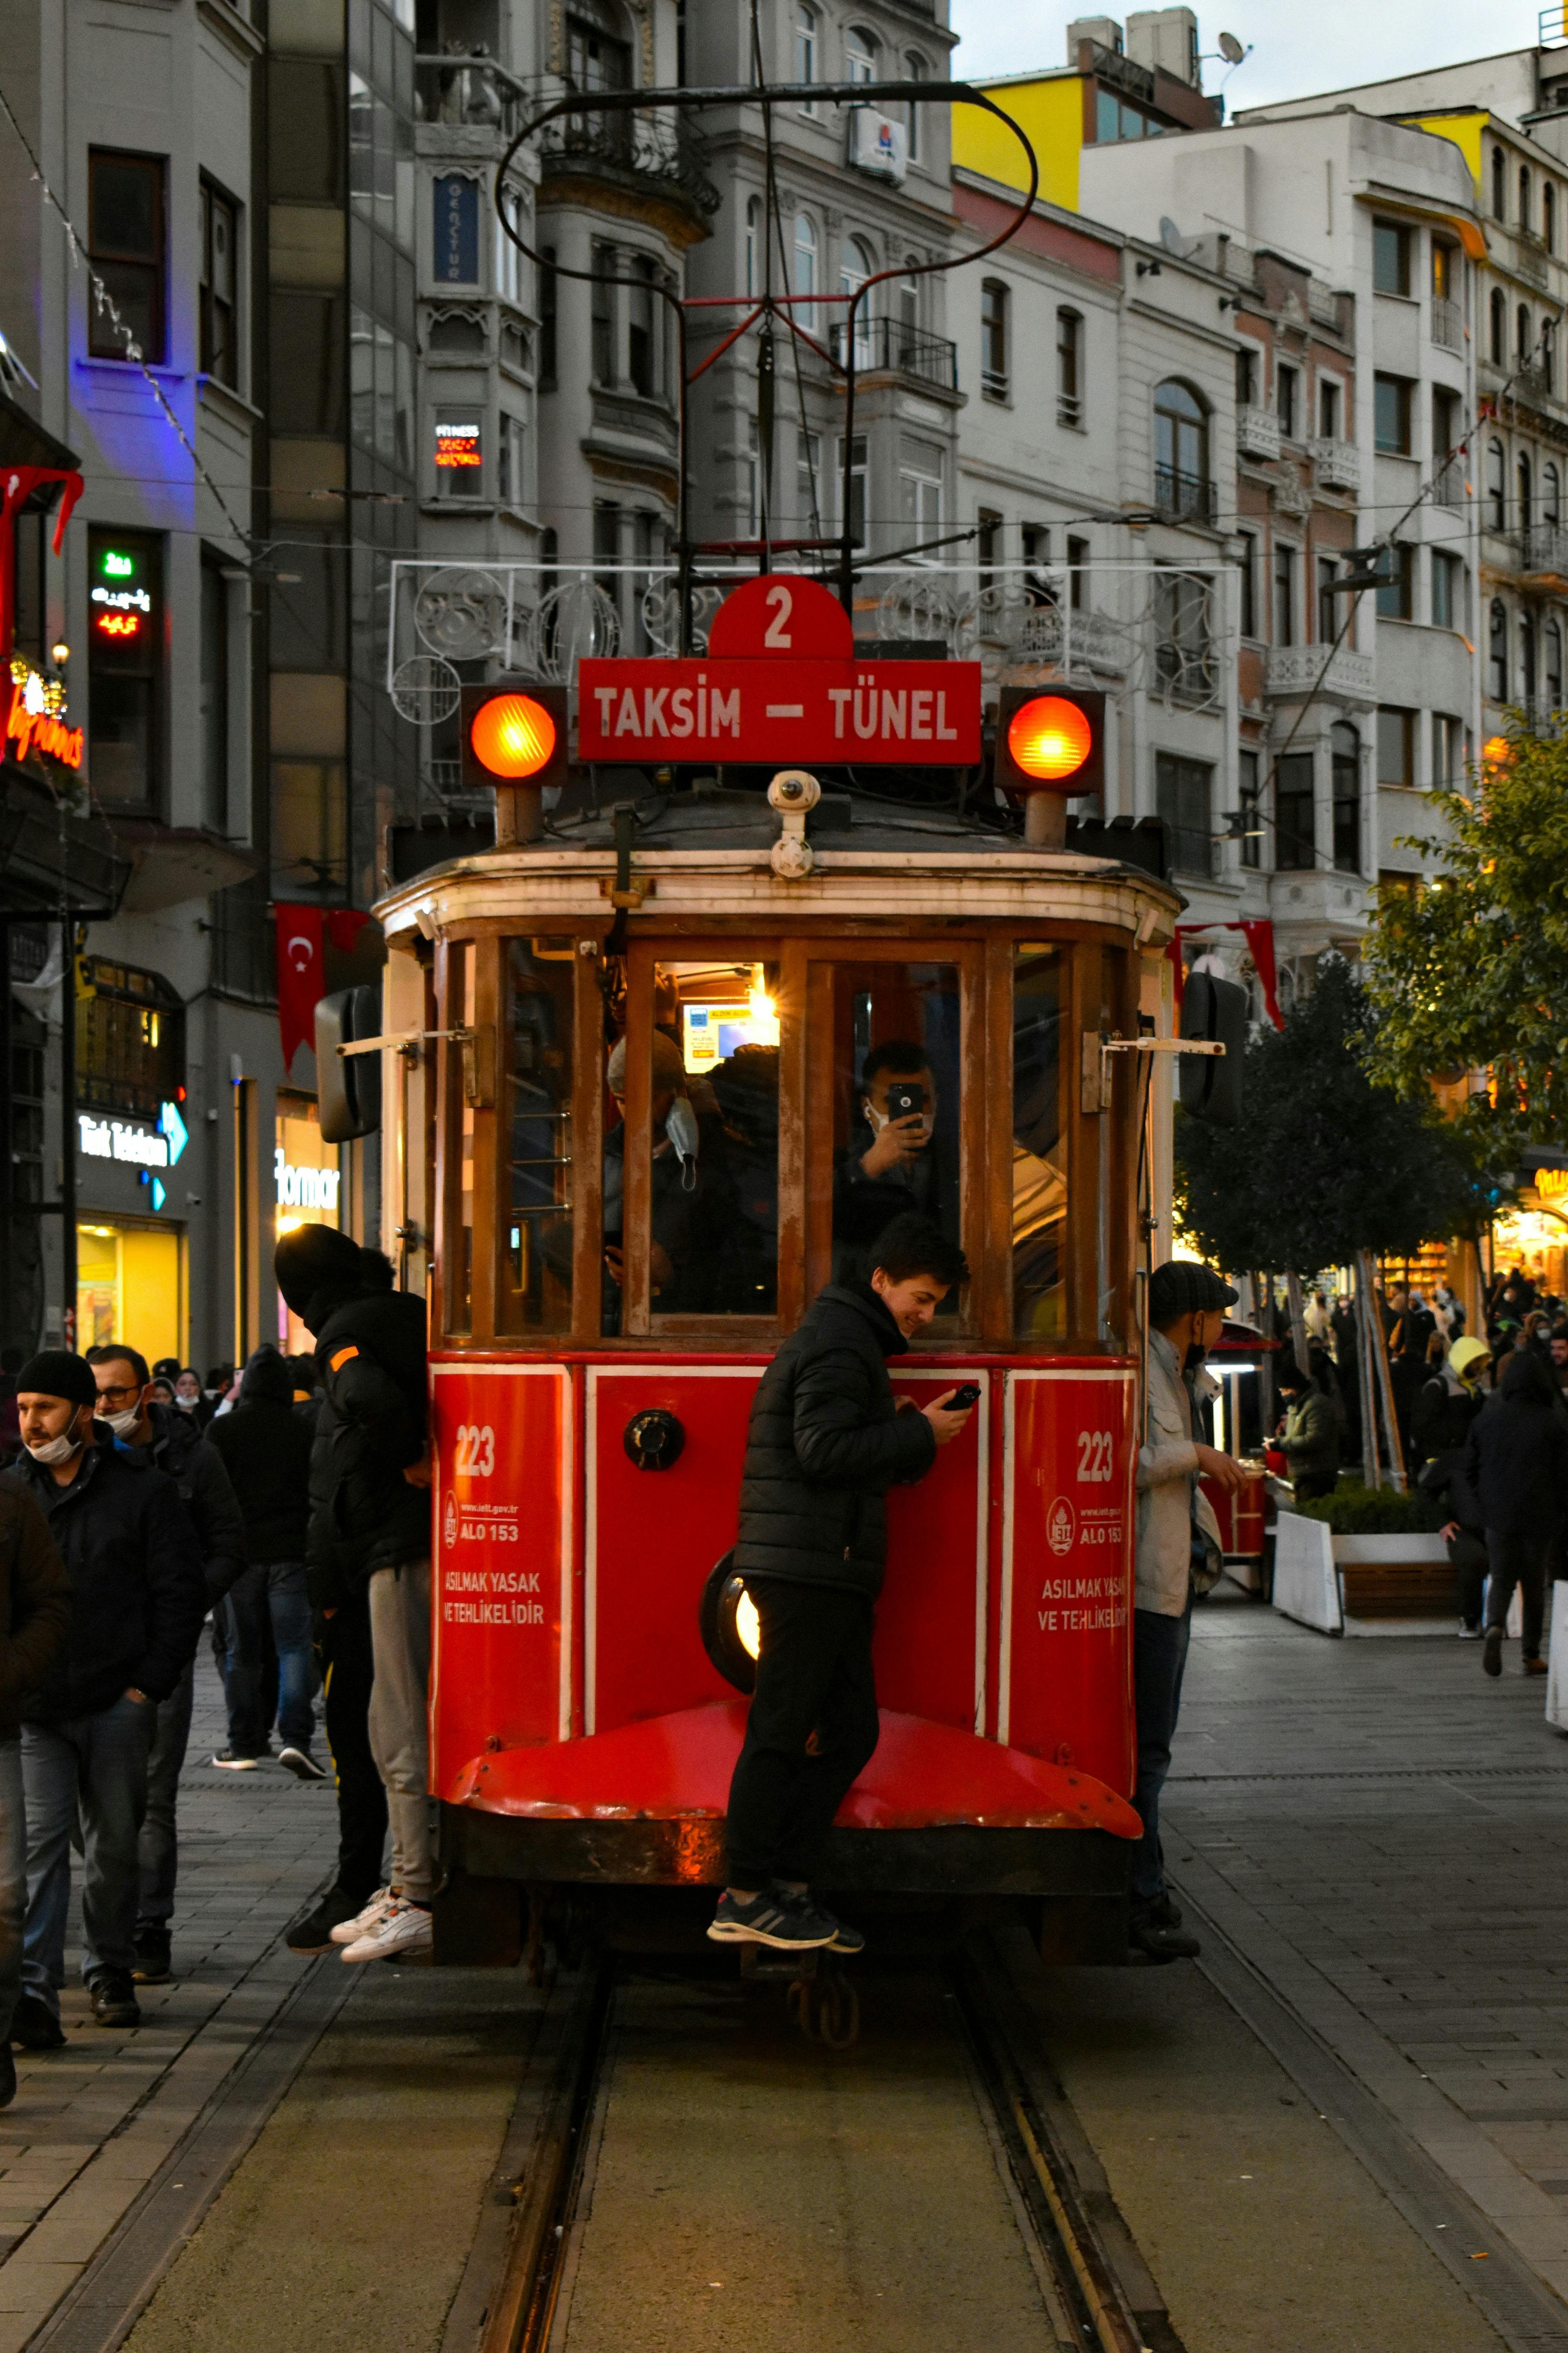 a person standing on a trolley